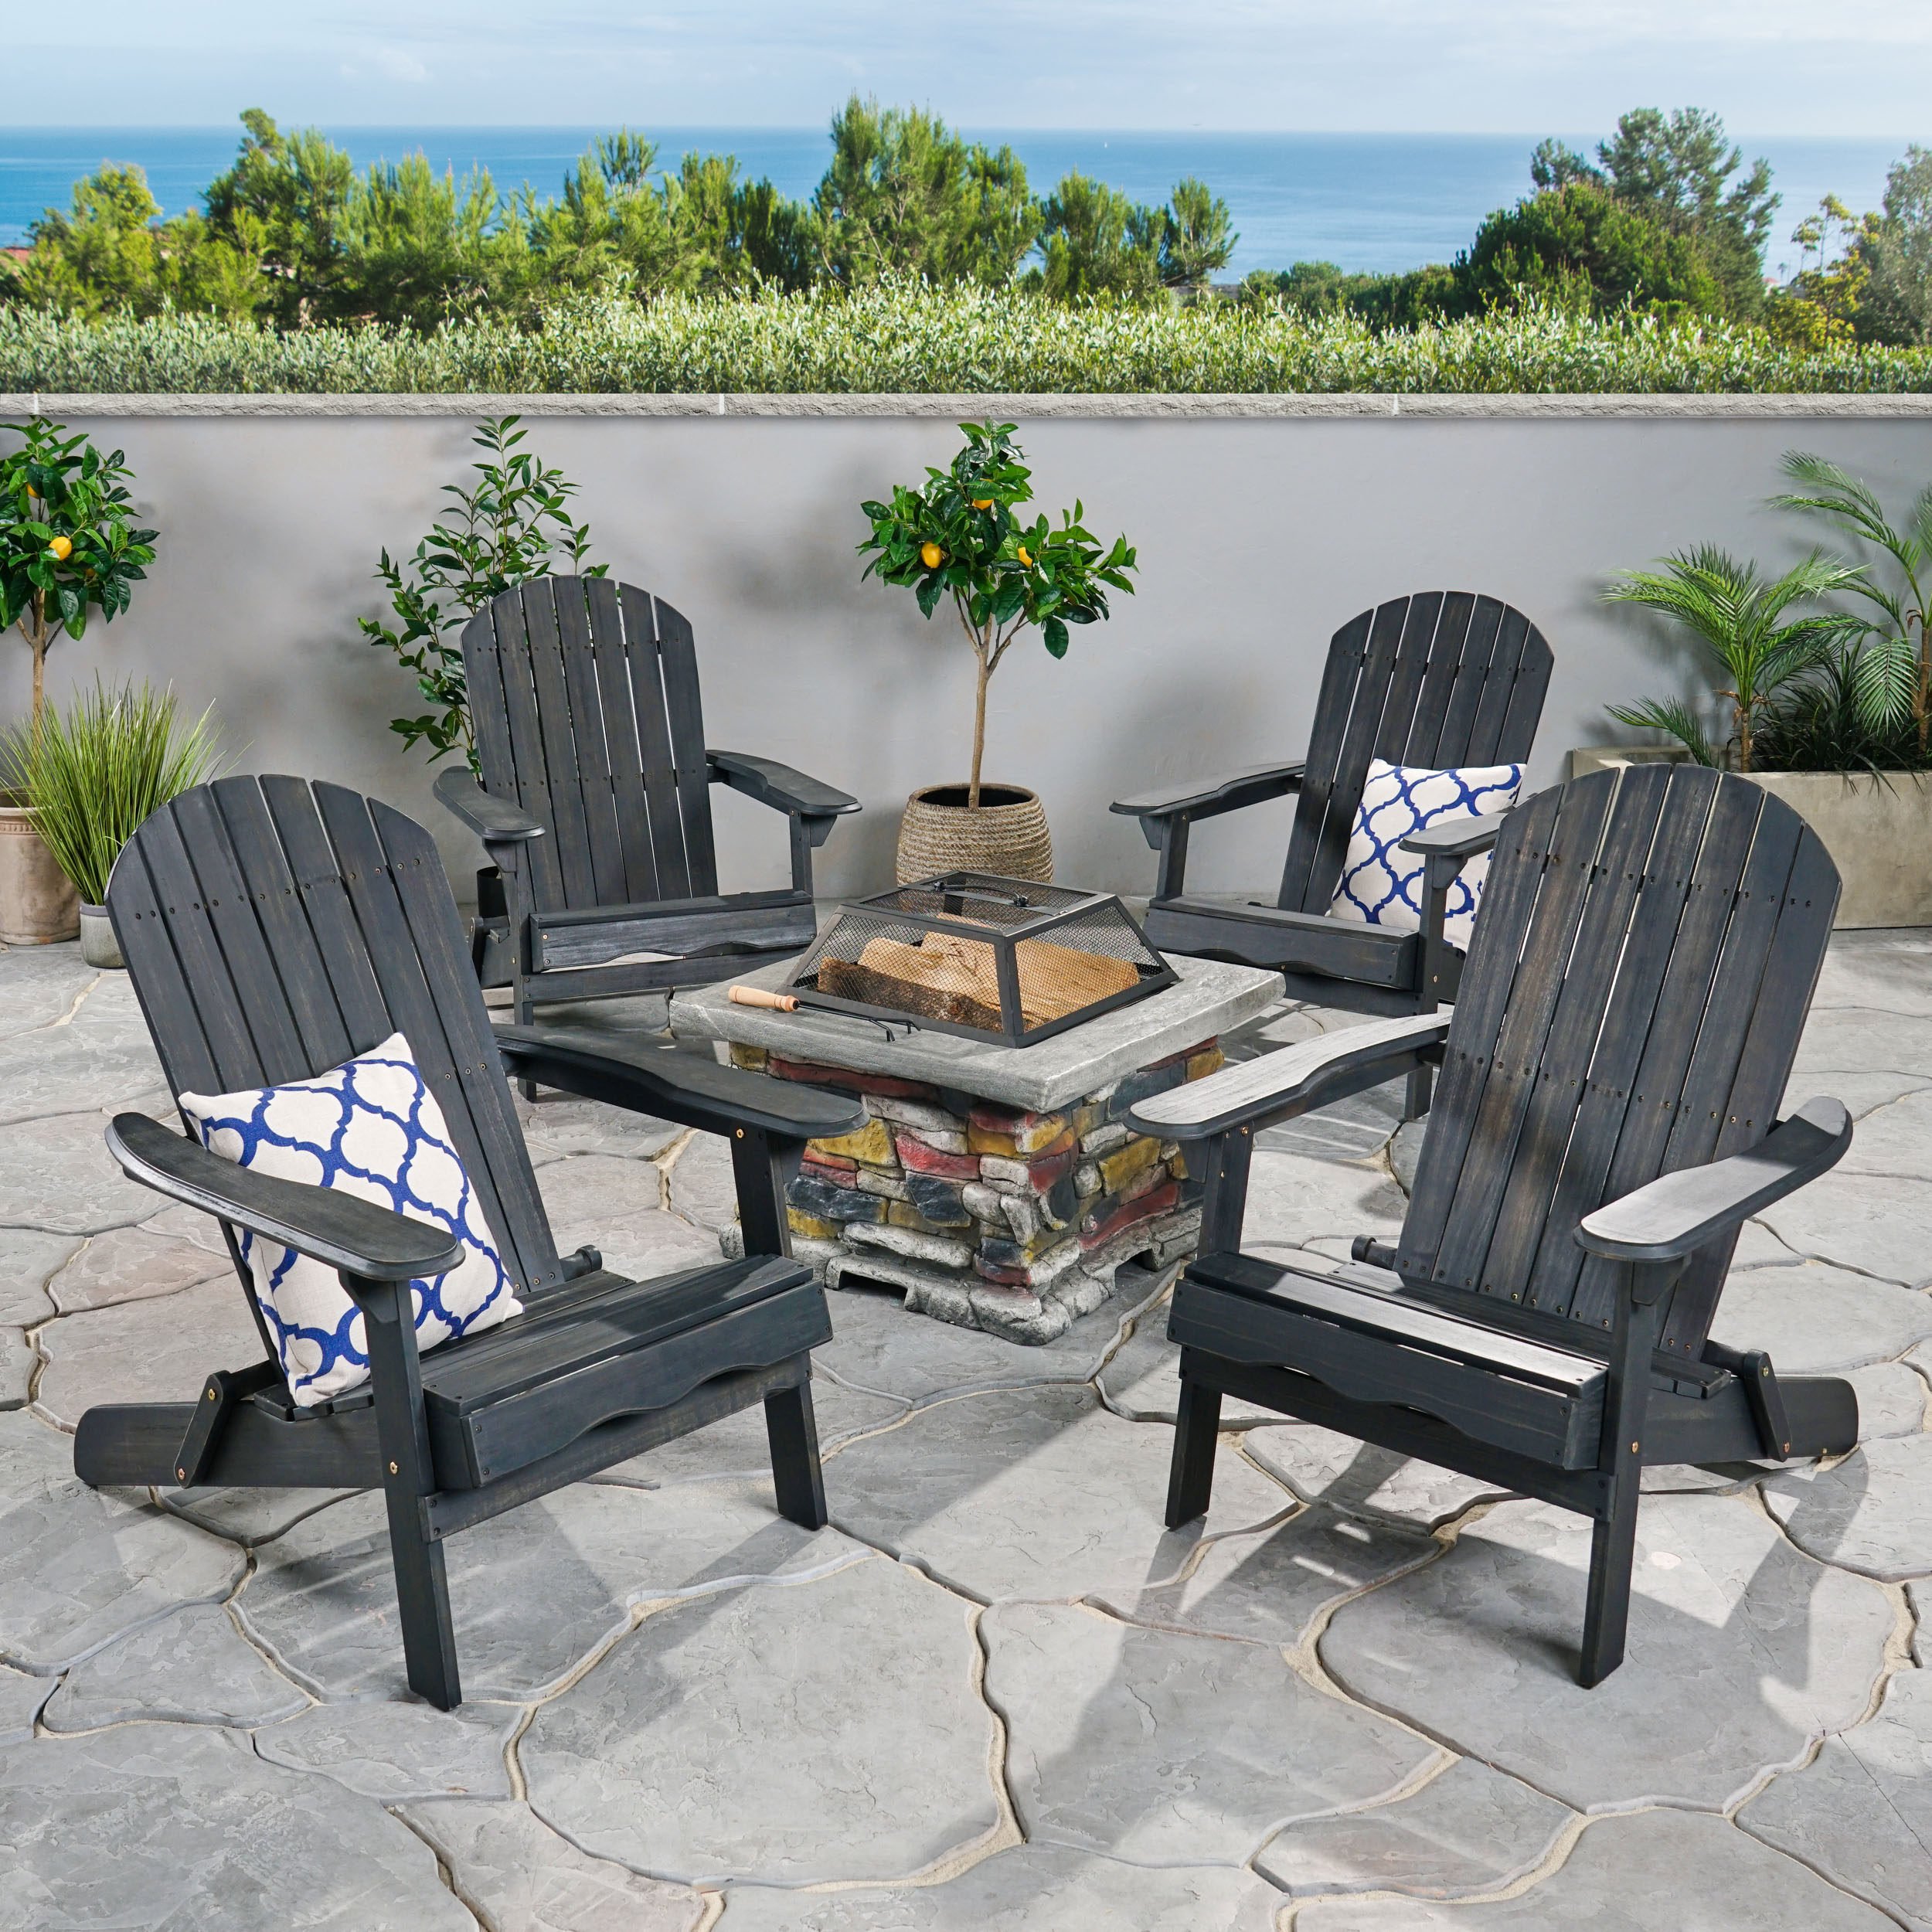 Benson Outdoor 5 Piece Acacia Wood/ Light Weight Concrete Adirondack Chair Set With Fire Pit - Natural